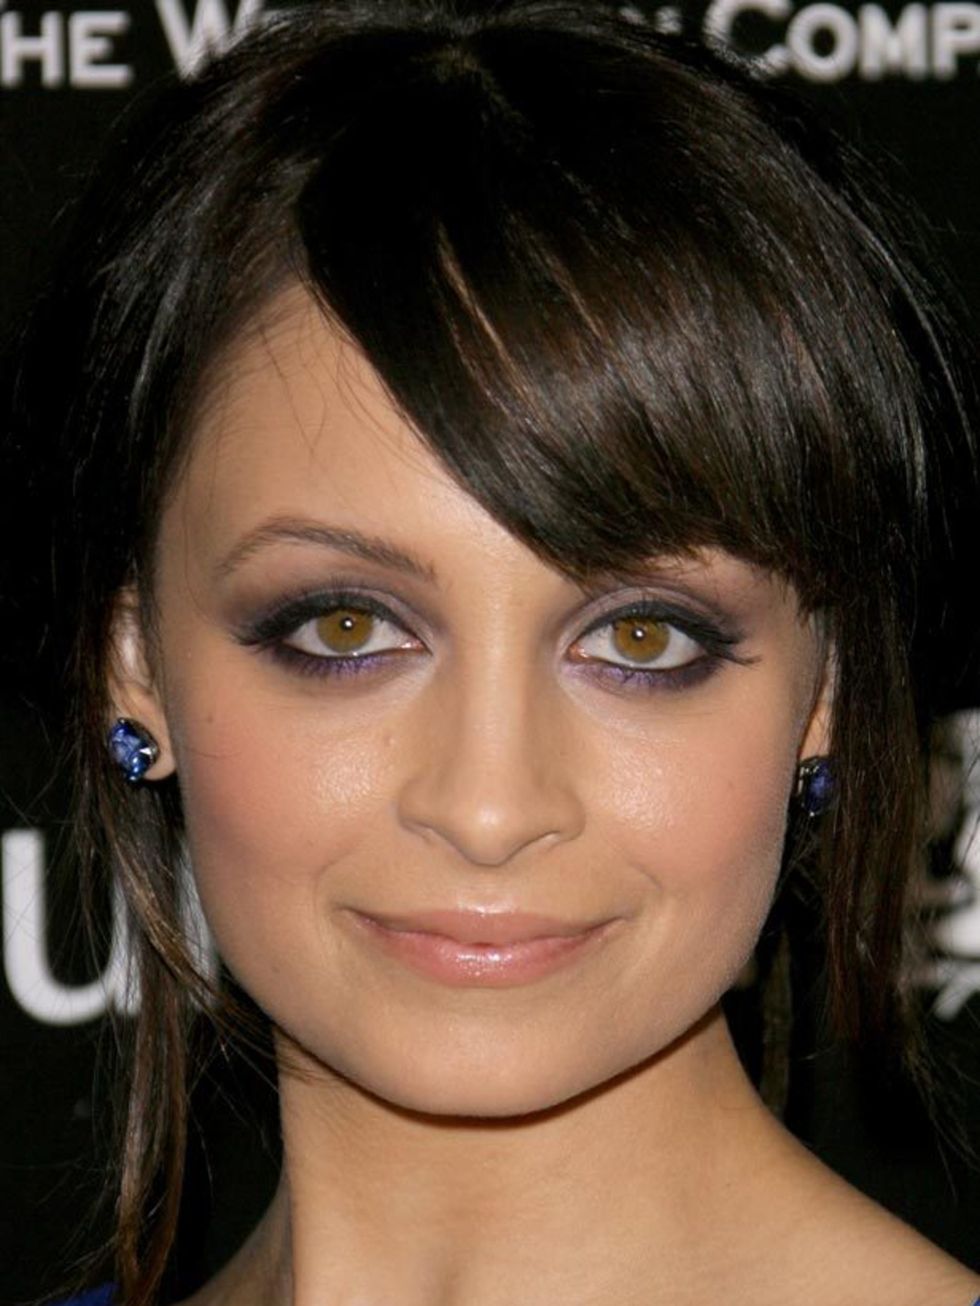 <p><a href="http://www.elleuk.com/starstyle/style-files/%28section%29/nicole-richie">Click here to see Nicole's style CV...</a></p>